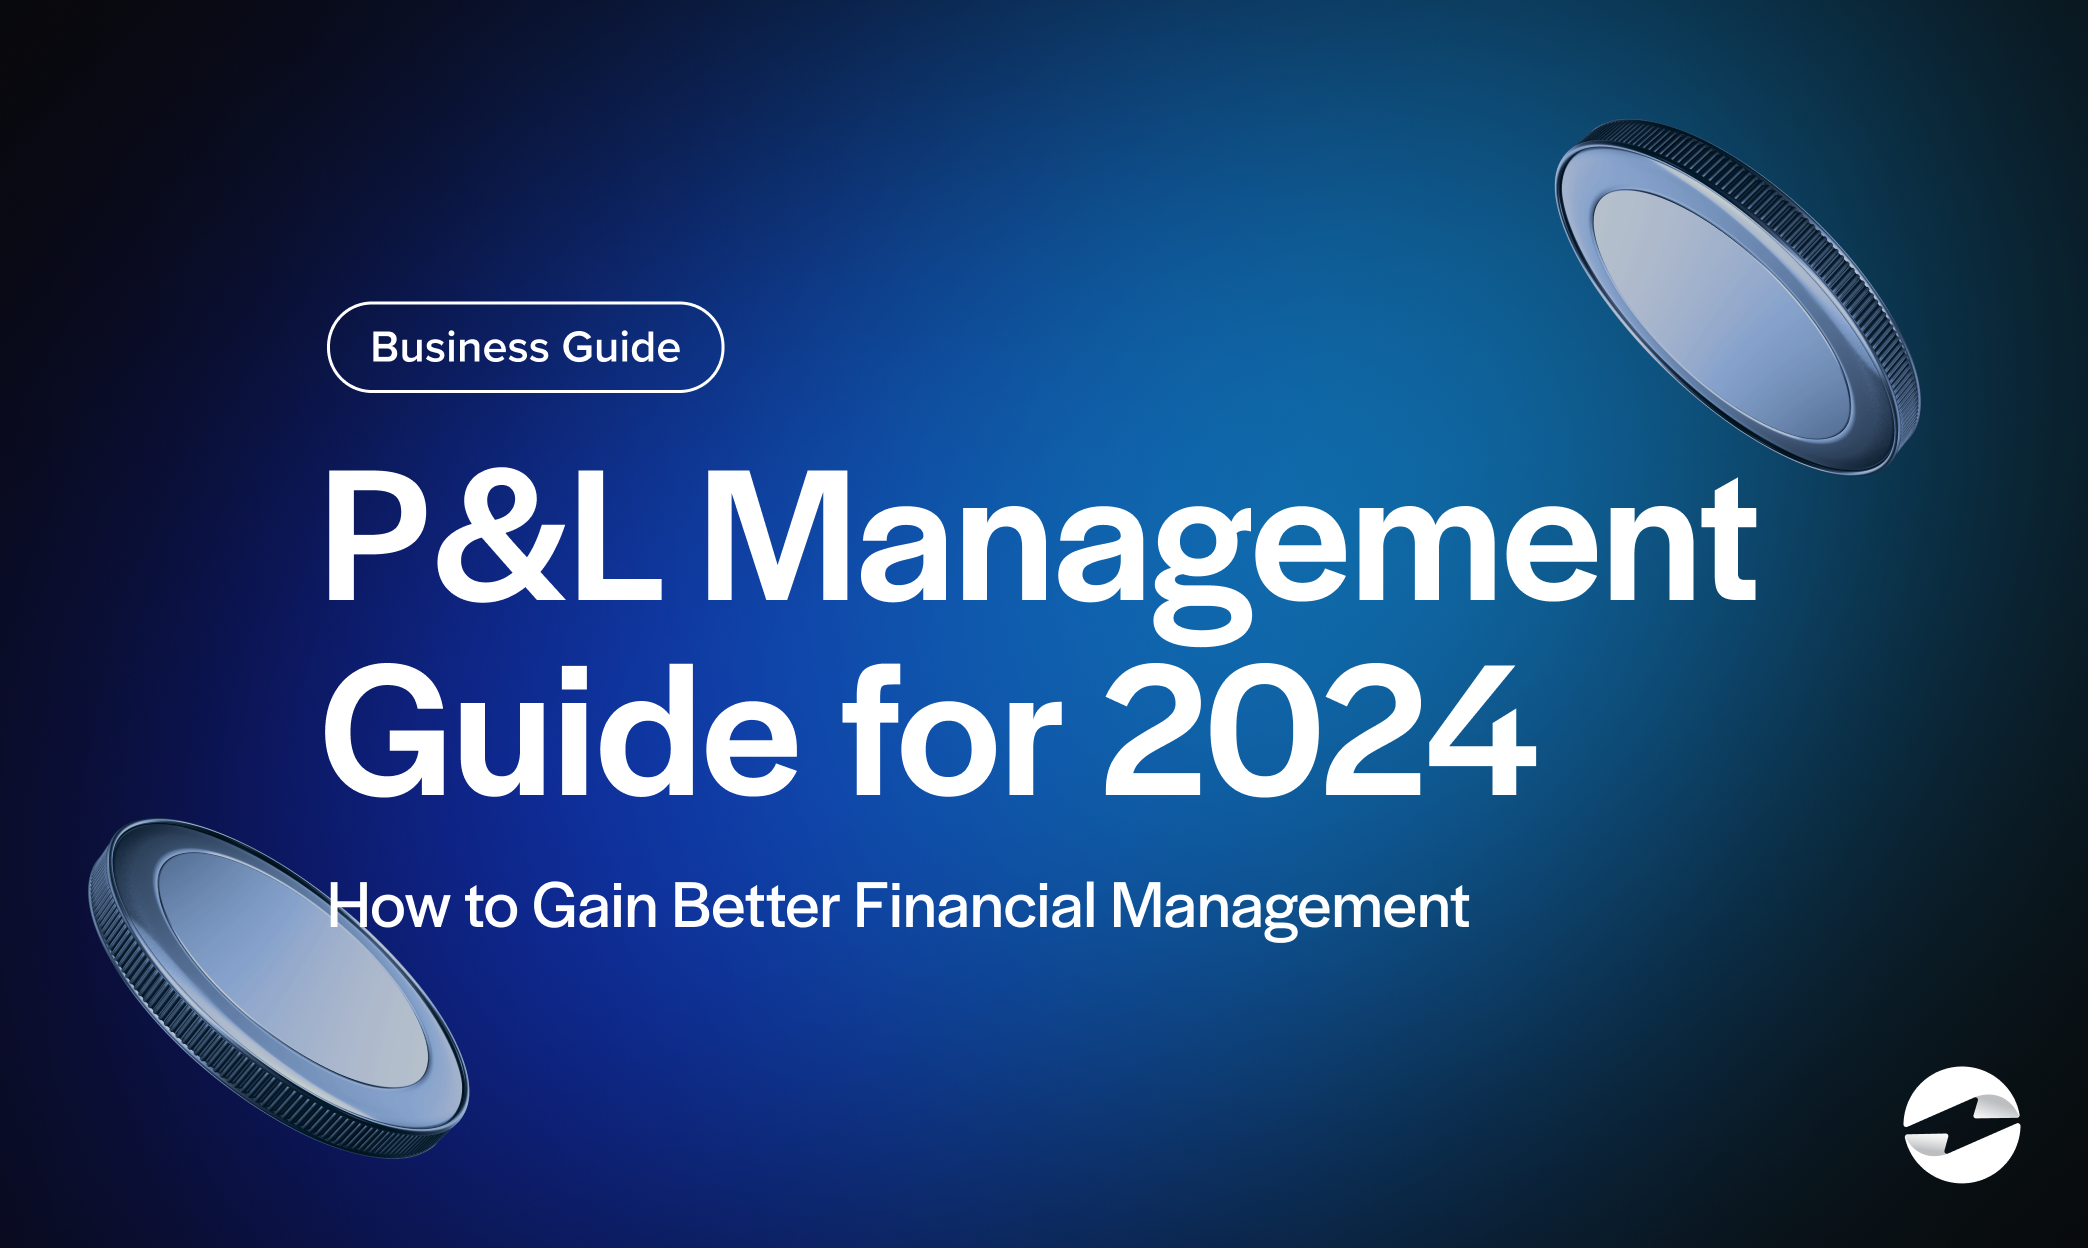 P&L Management Guide for 2024: How to Gain Better Financial Management